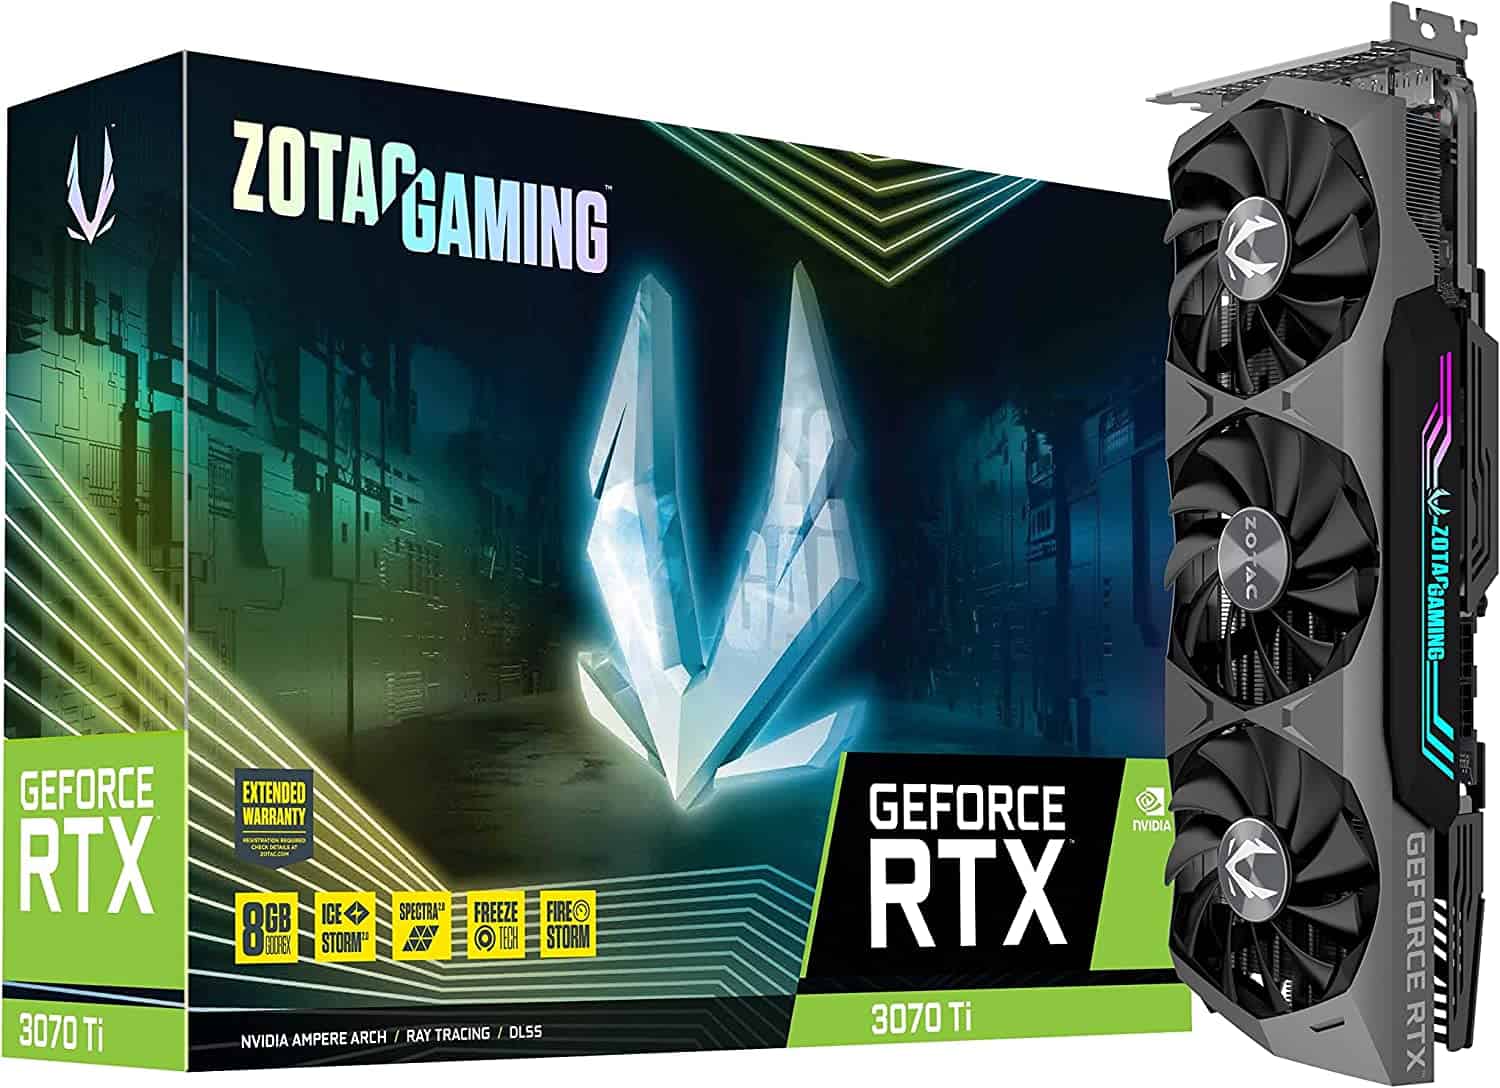 Let's F-OC-US on this Zotac RTX 3070 Ti overclocked offer - PC Guide